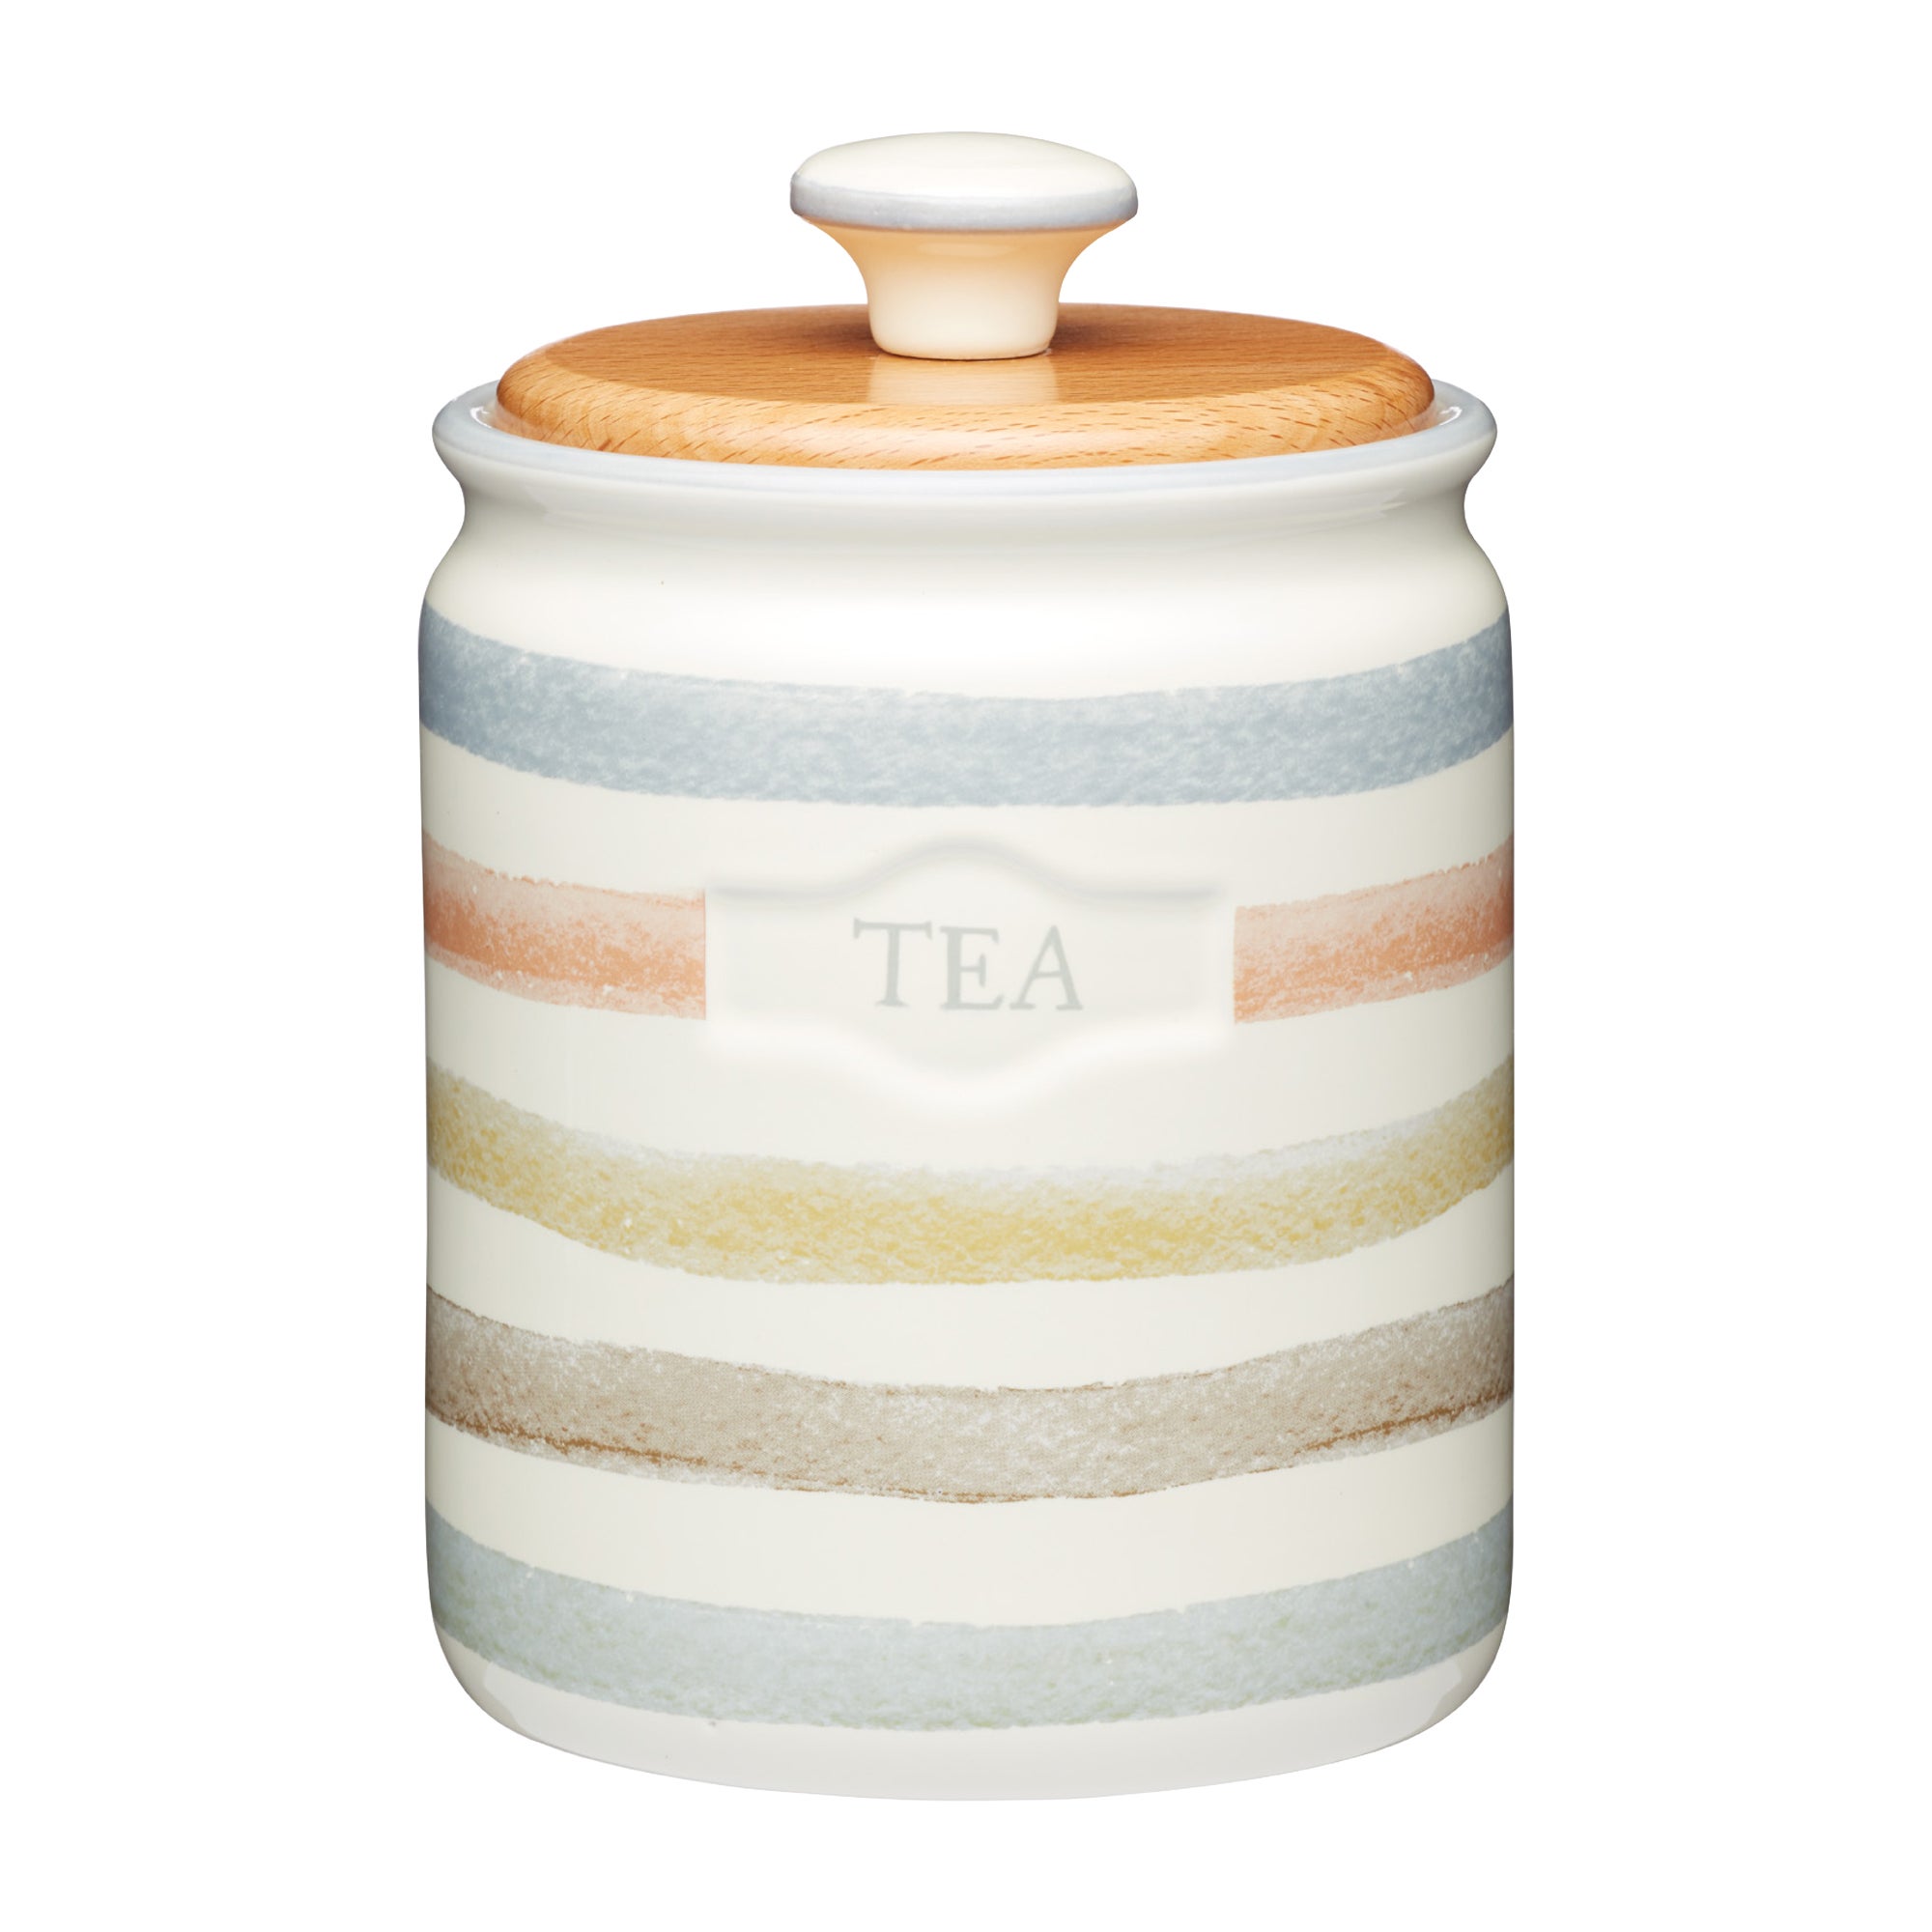 Image of KitchenCraft Ceramic Tea Canister White, Blue and Brown